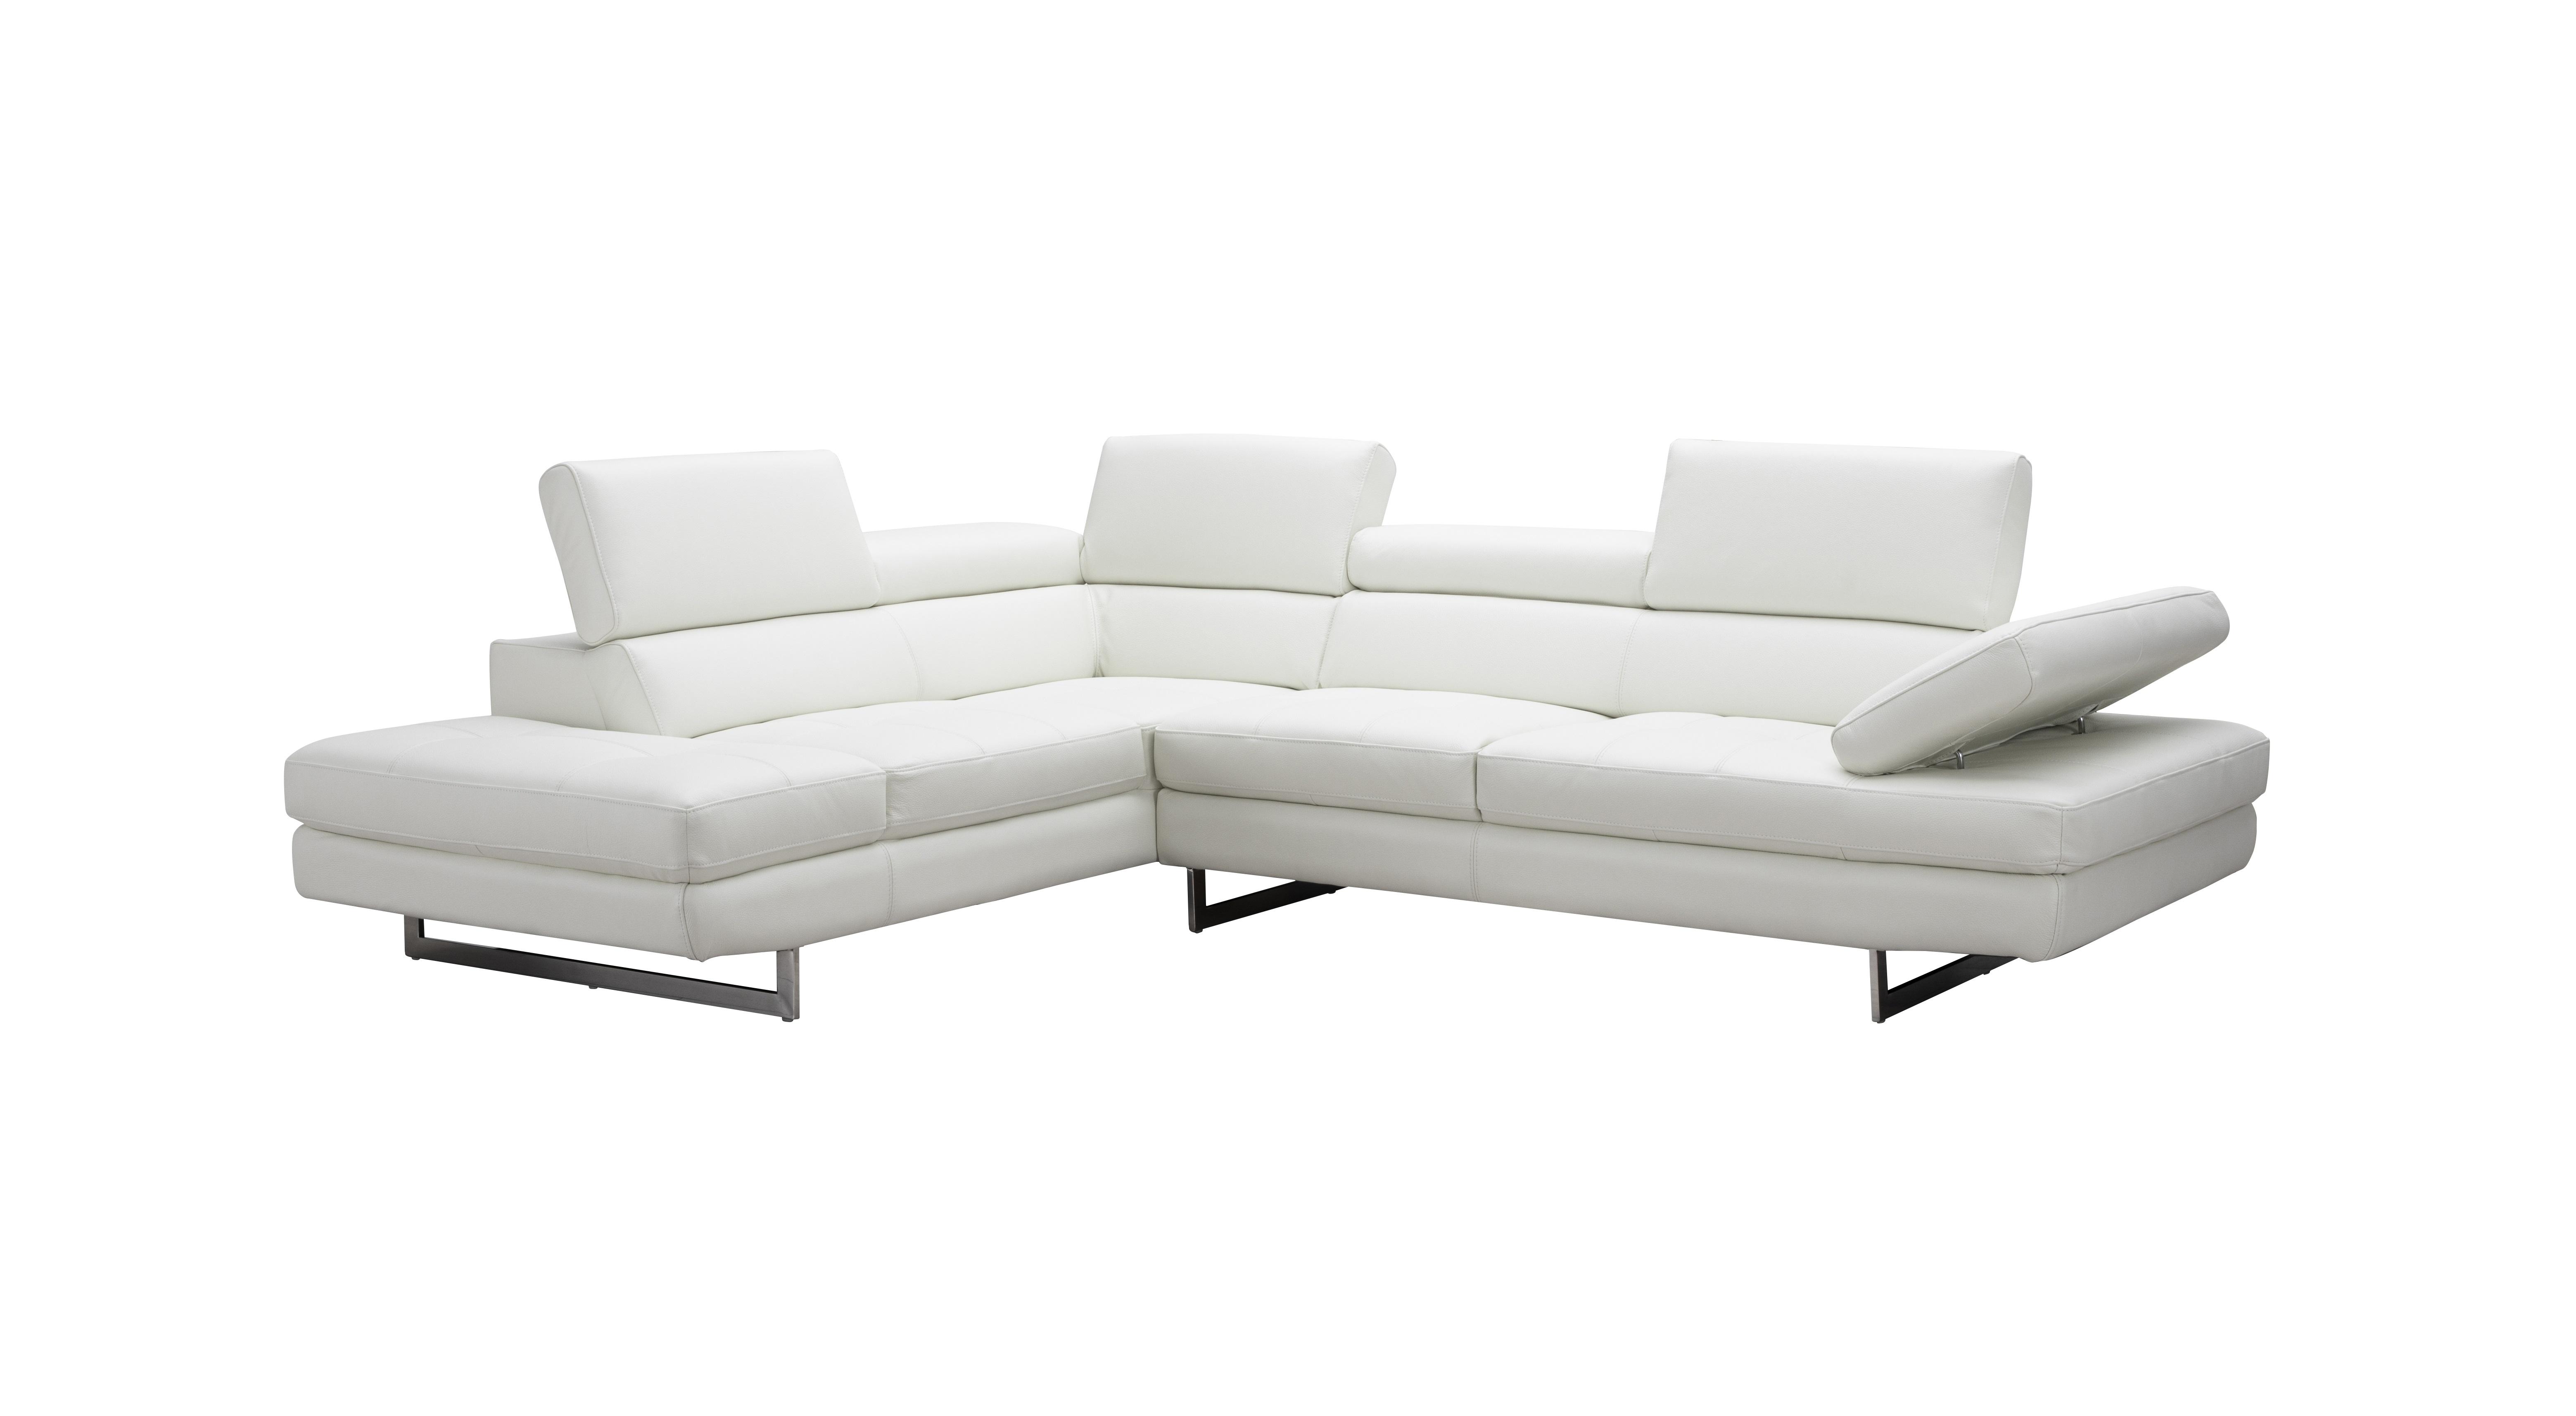 Contemporary Sectional Sofa A761 Off White SKU178551 in Off-White Leather